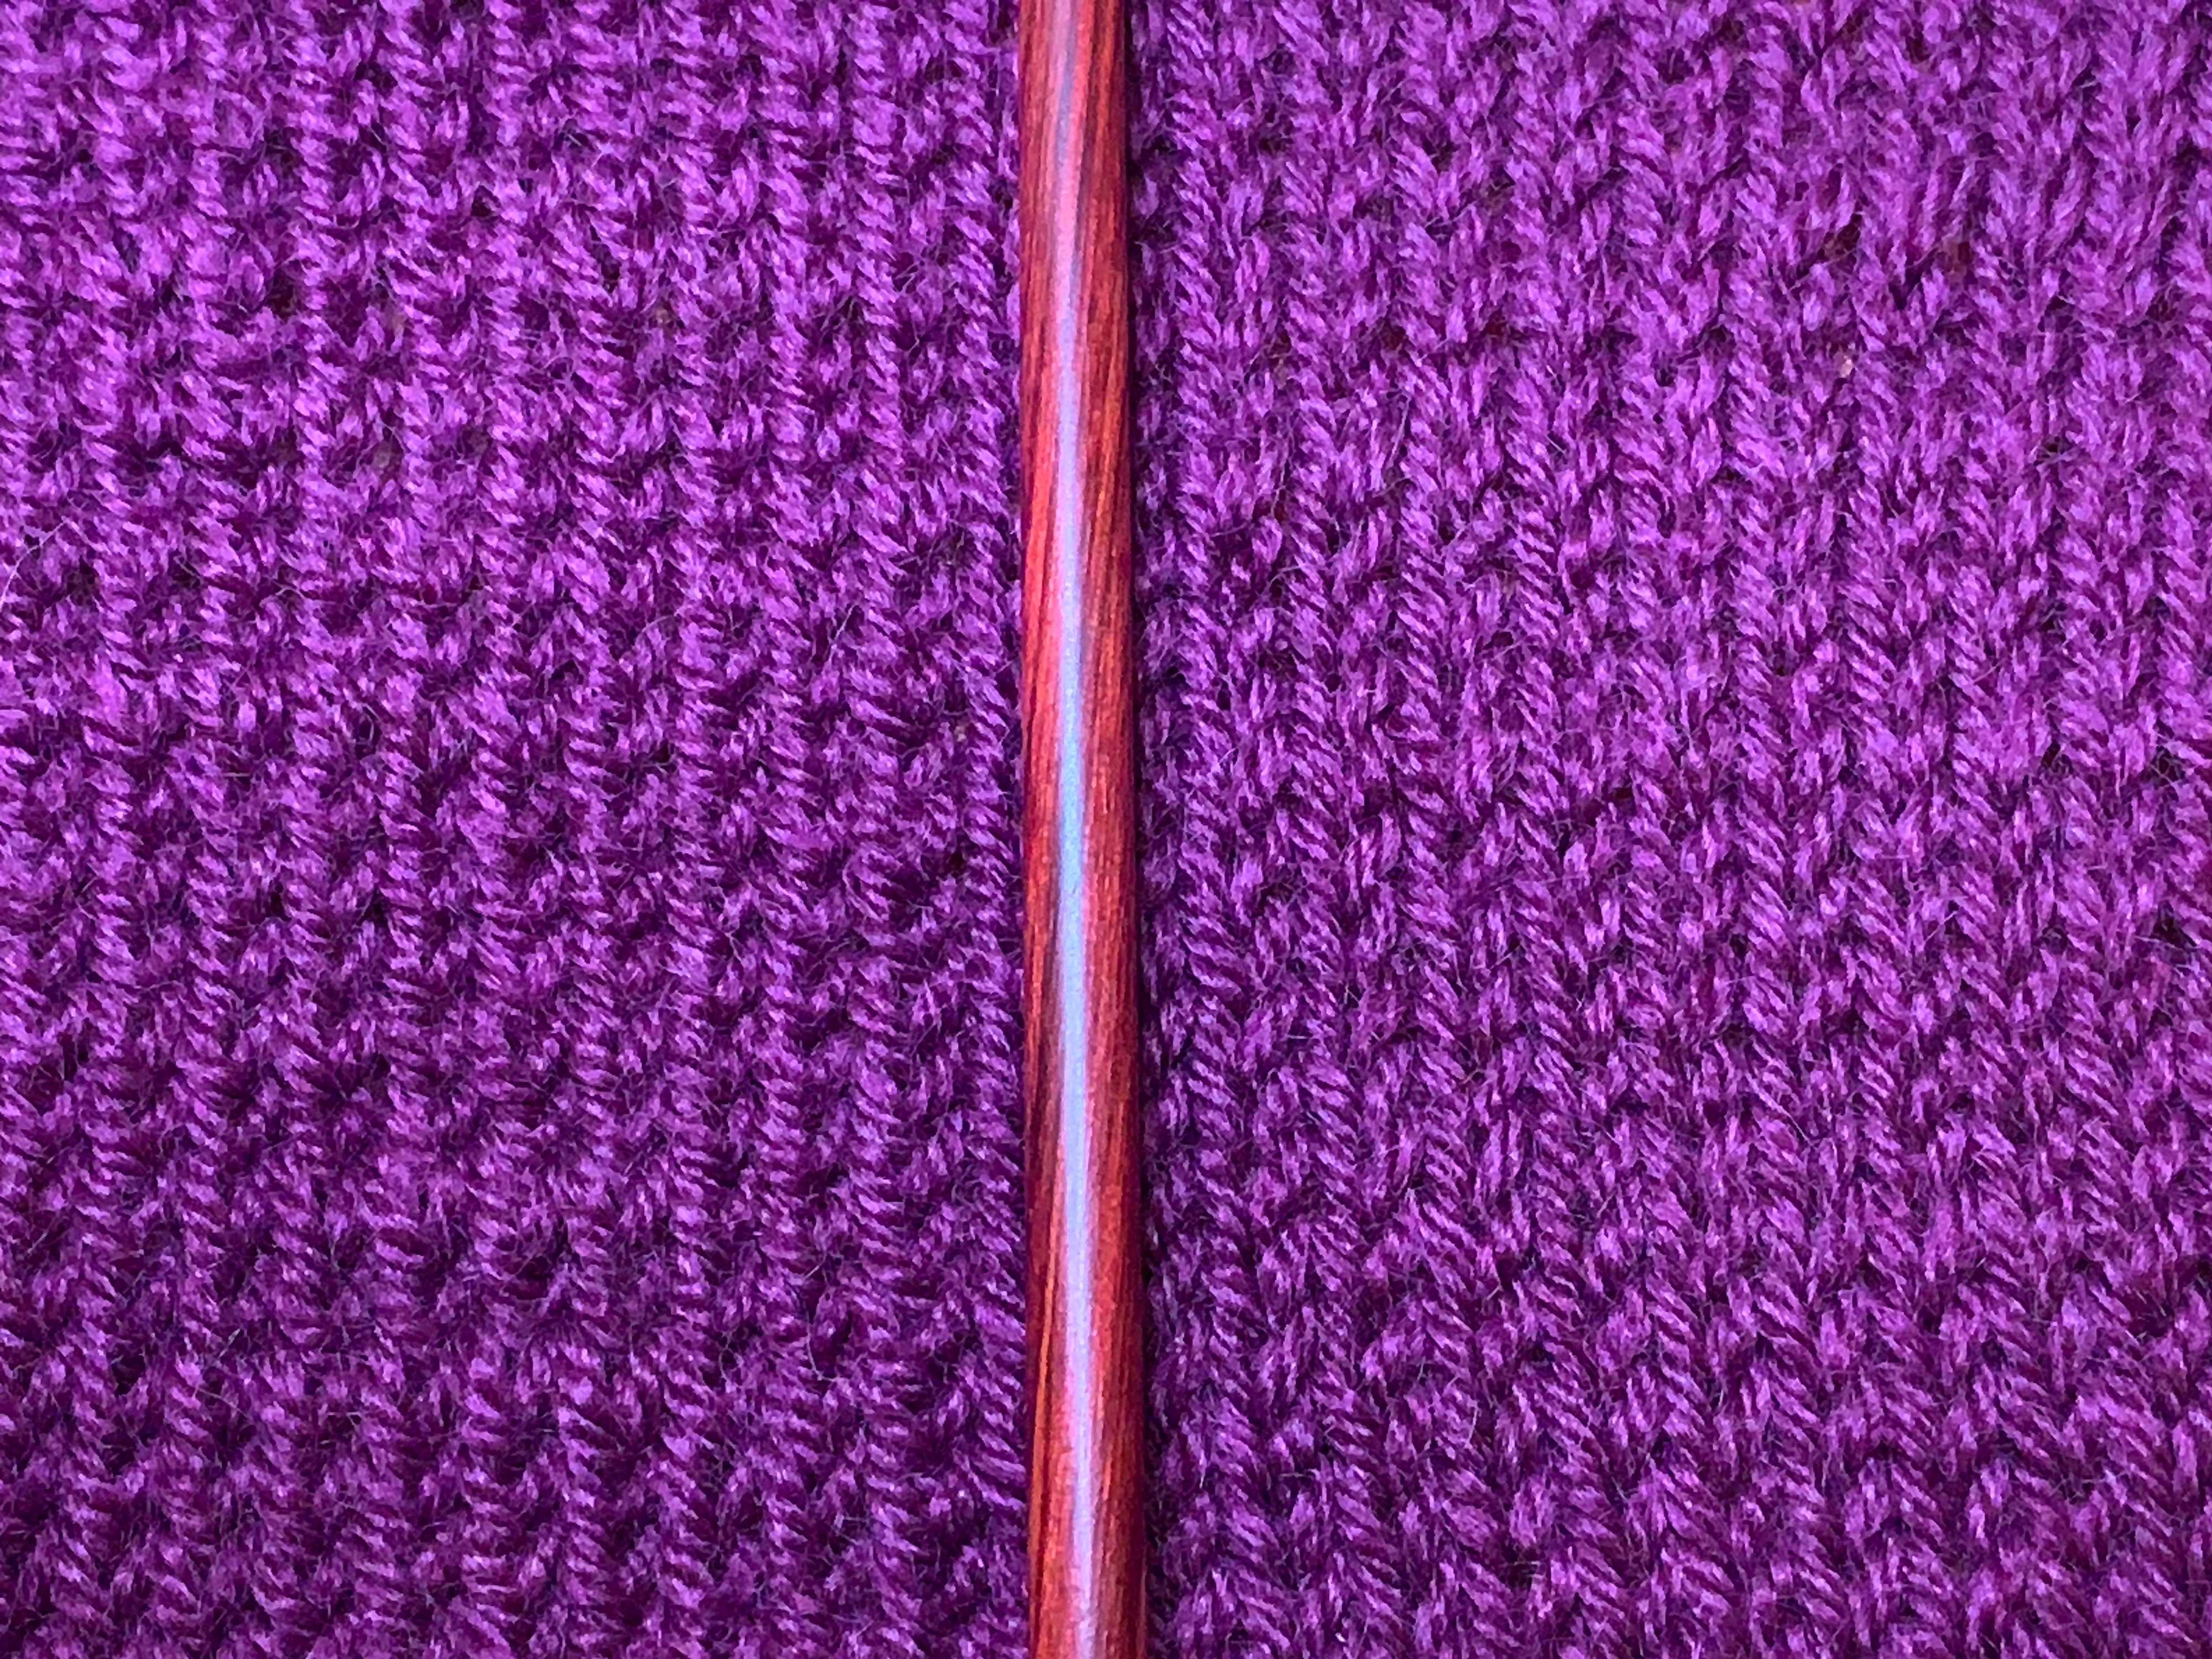 A comparison of normal stockinette stitch (right) with twisted stockinette (left).